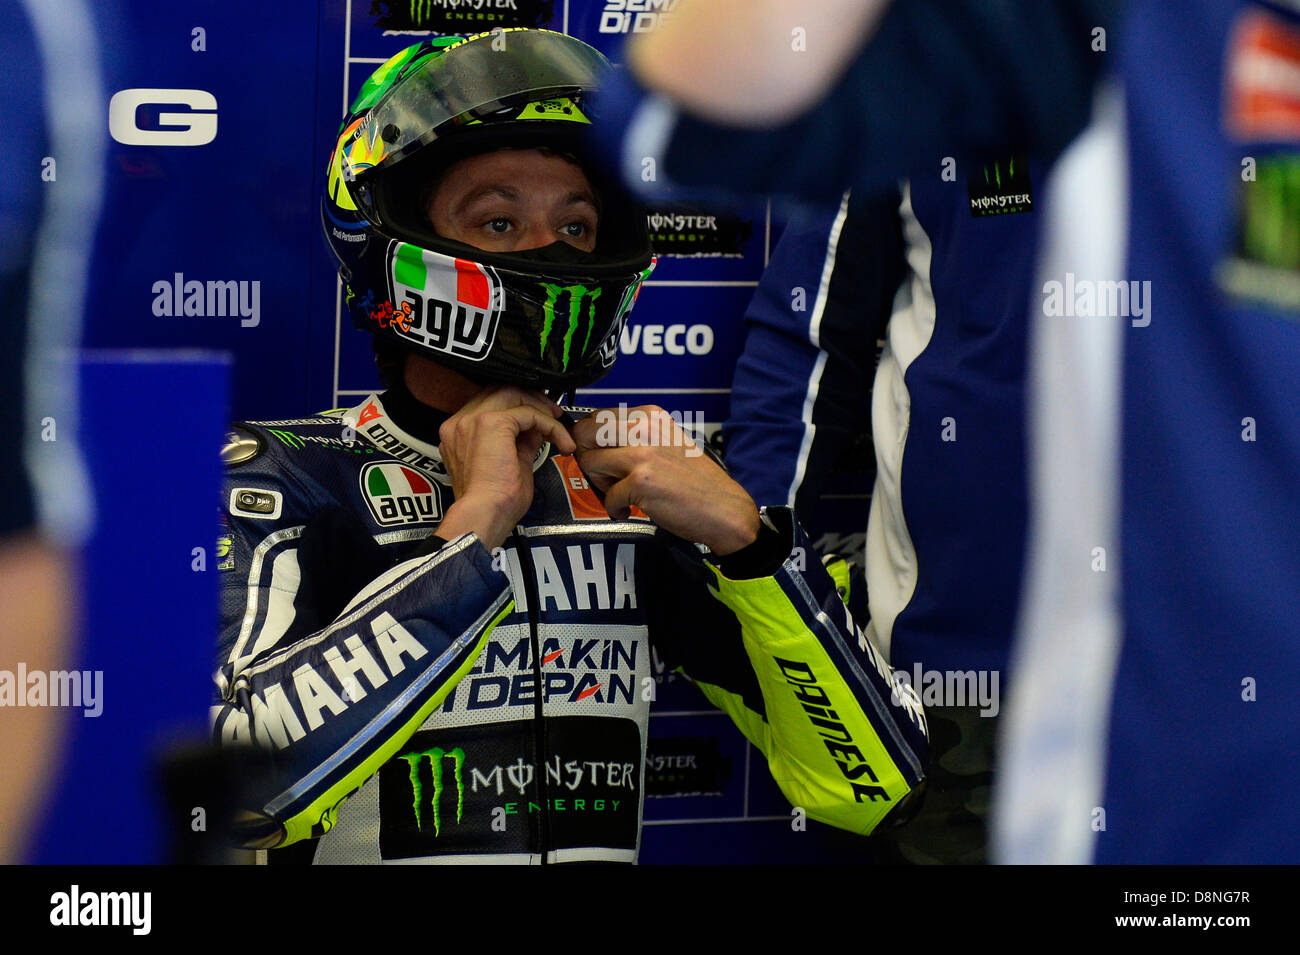 Mugello,Italy.1st June 2013. Valentino Rossi (Yamaha Factory Racing) during the qualifying session of  Moto GP World Championship from the Mugello racing circuit. Credit:  Gaetano Piazzolla/Alamy Live News Stock Photo